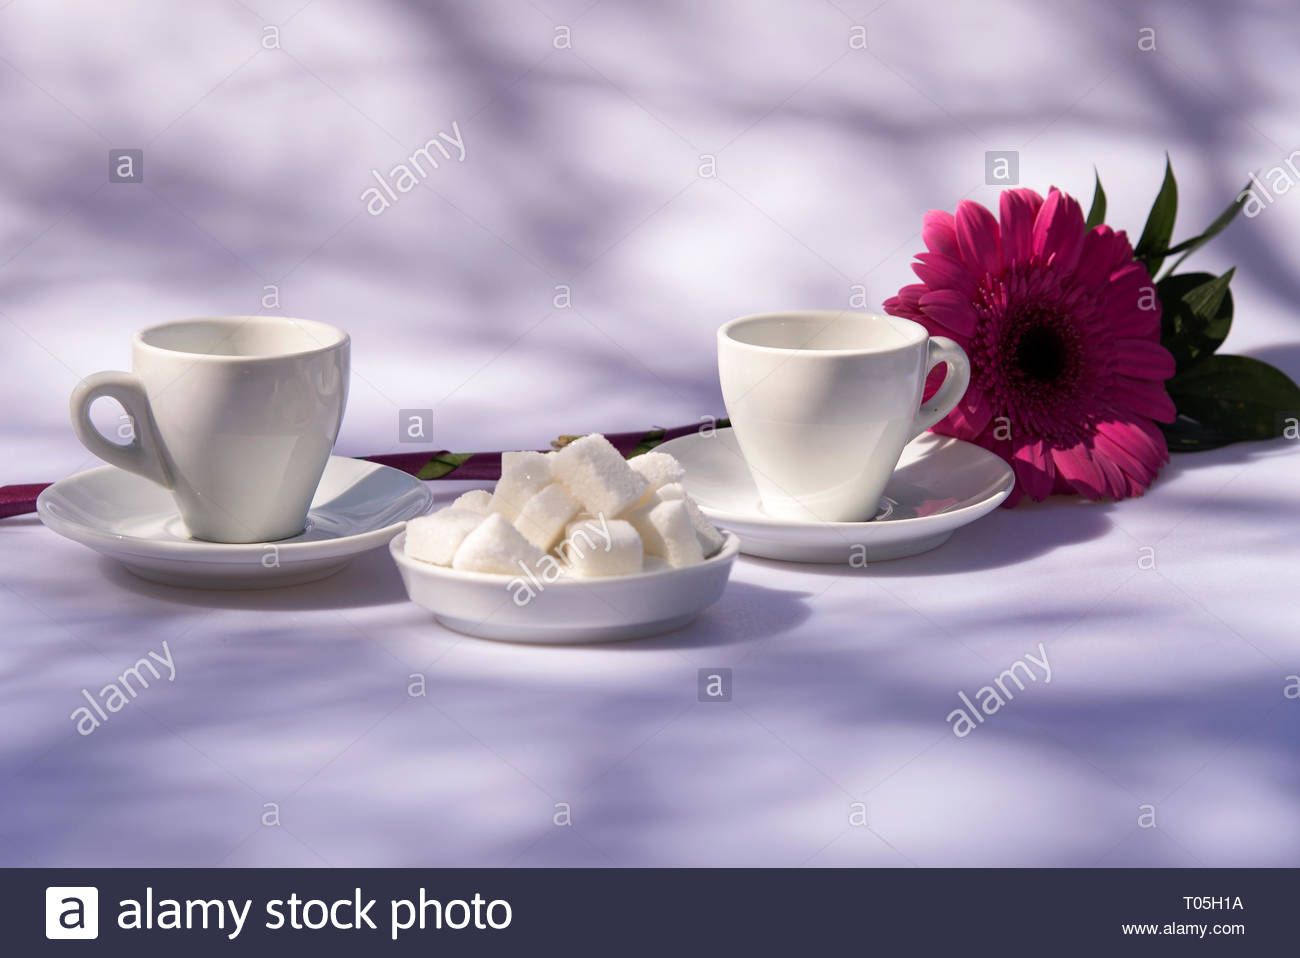 Decorative Three Stacked Coffee Tea Cups Iron Widget Wall Decor Intended For Fashionable Coffee Cups Abstract Stock Photos & Coffee Cups Abstract Stock (View 17 of 20)